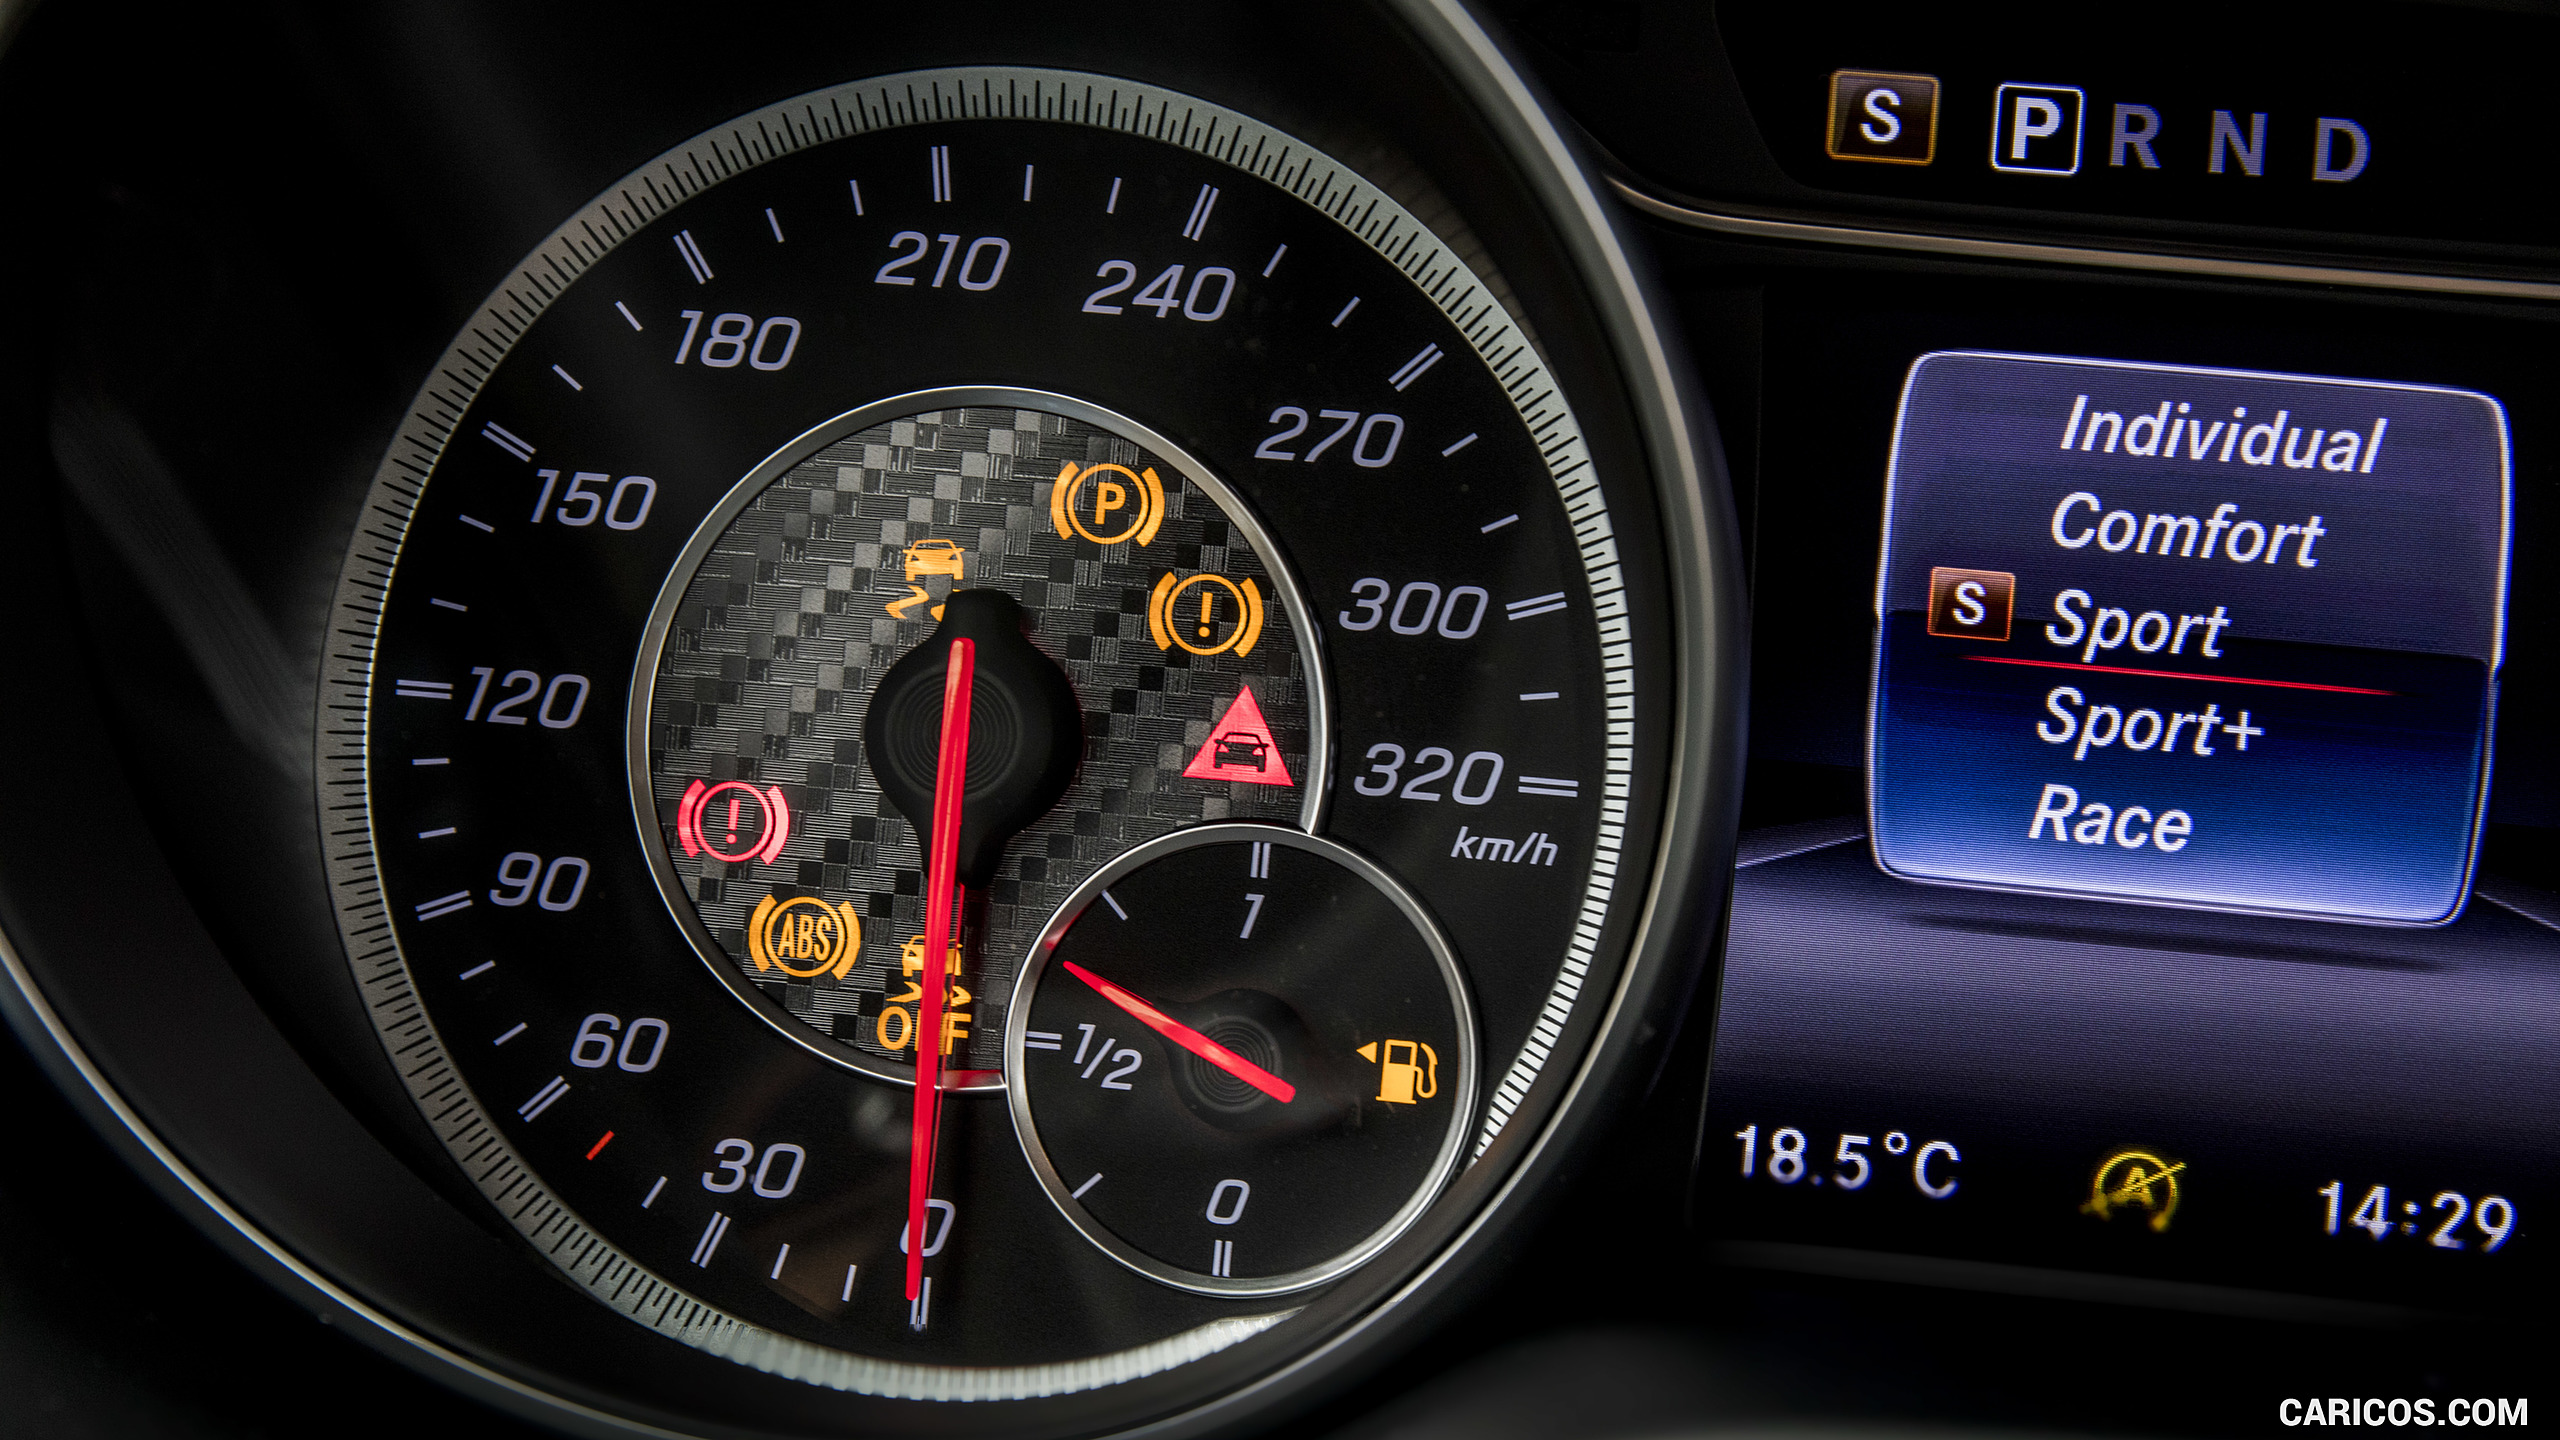 2018 Mercedes-AMG GLA 45 4MATIC - Instrument Cluster, #87 of 88